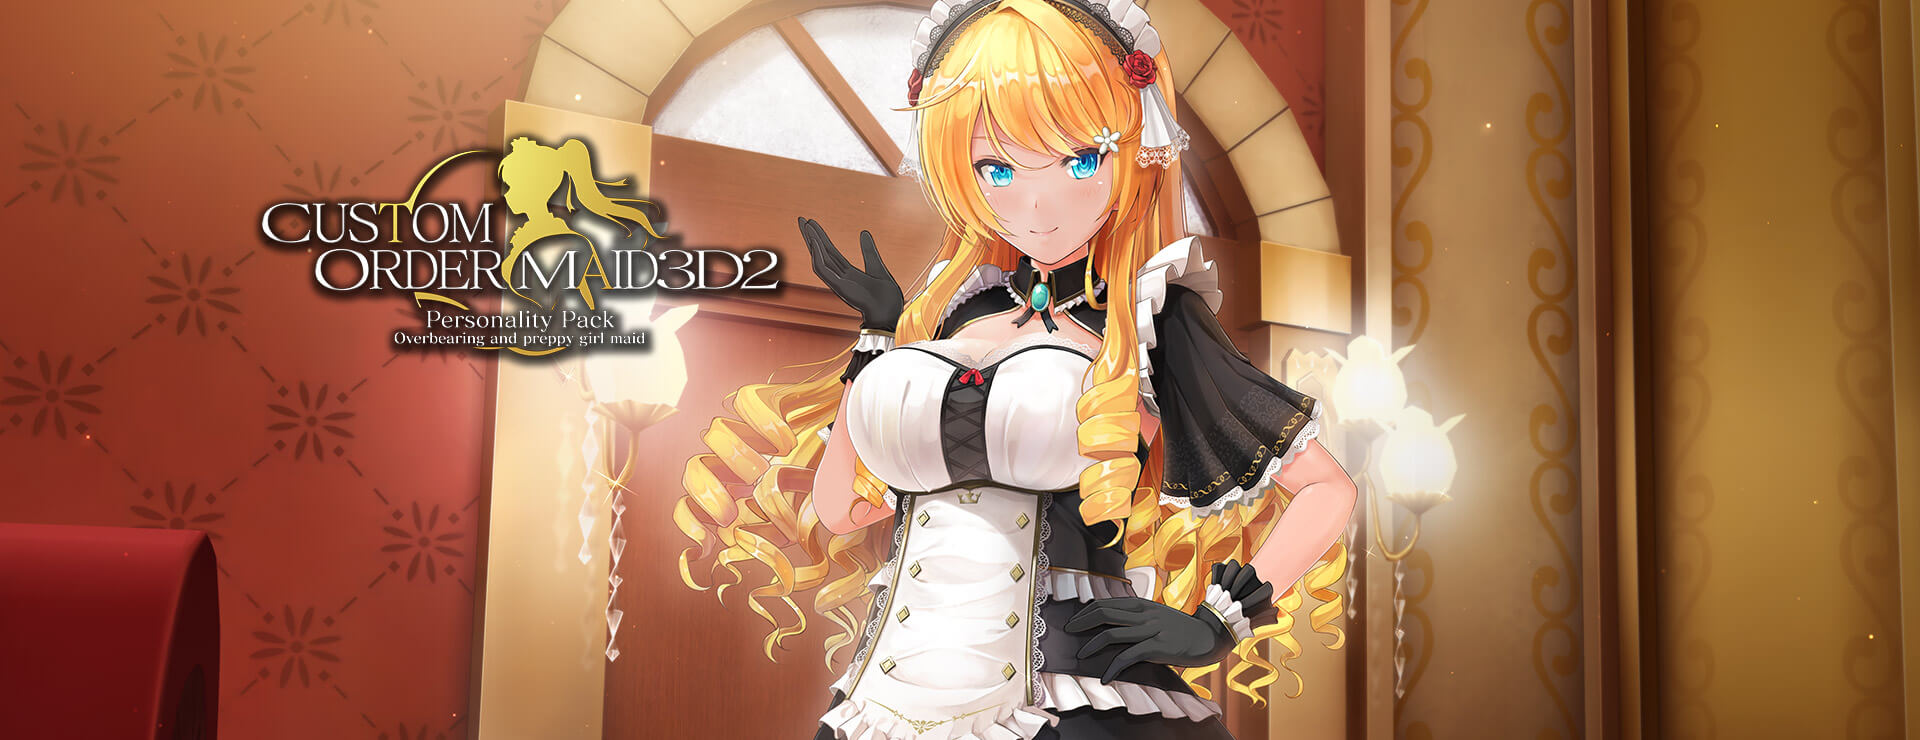 Custom Order Maid 3D2: Overbearing and Preppy Girl Maid DLC - Symulacja Gra